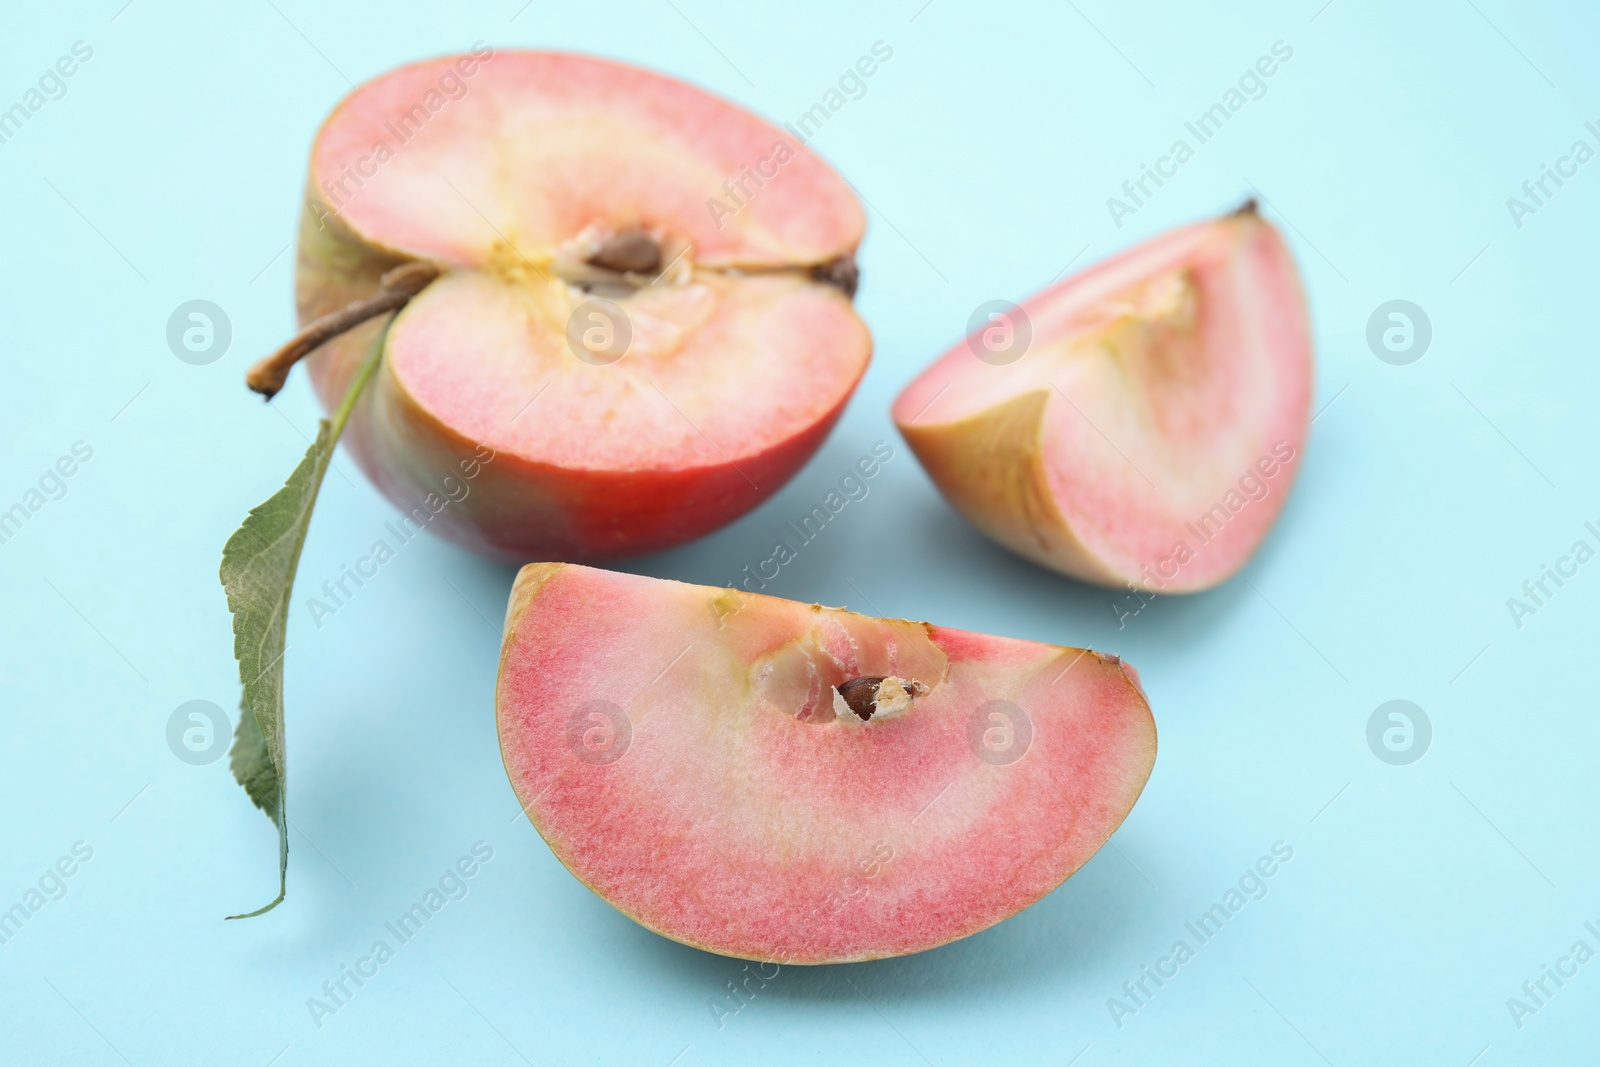 Photo of Cut apple with red pulp on light blue background, closeup